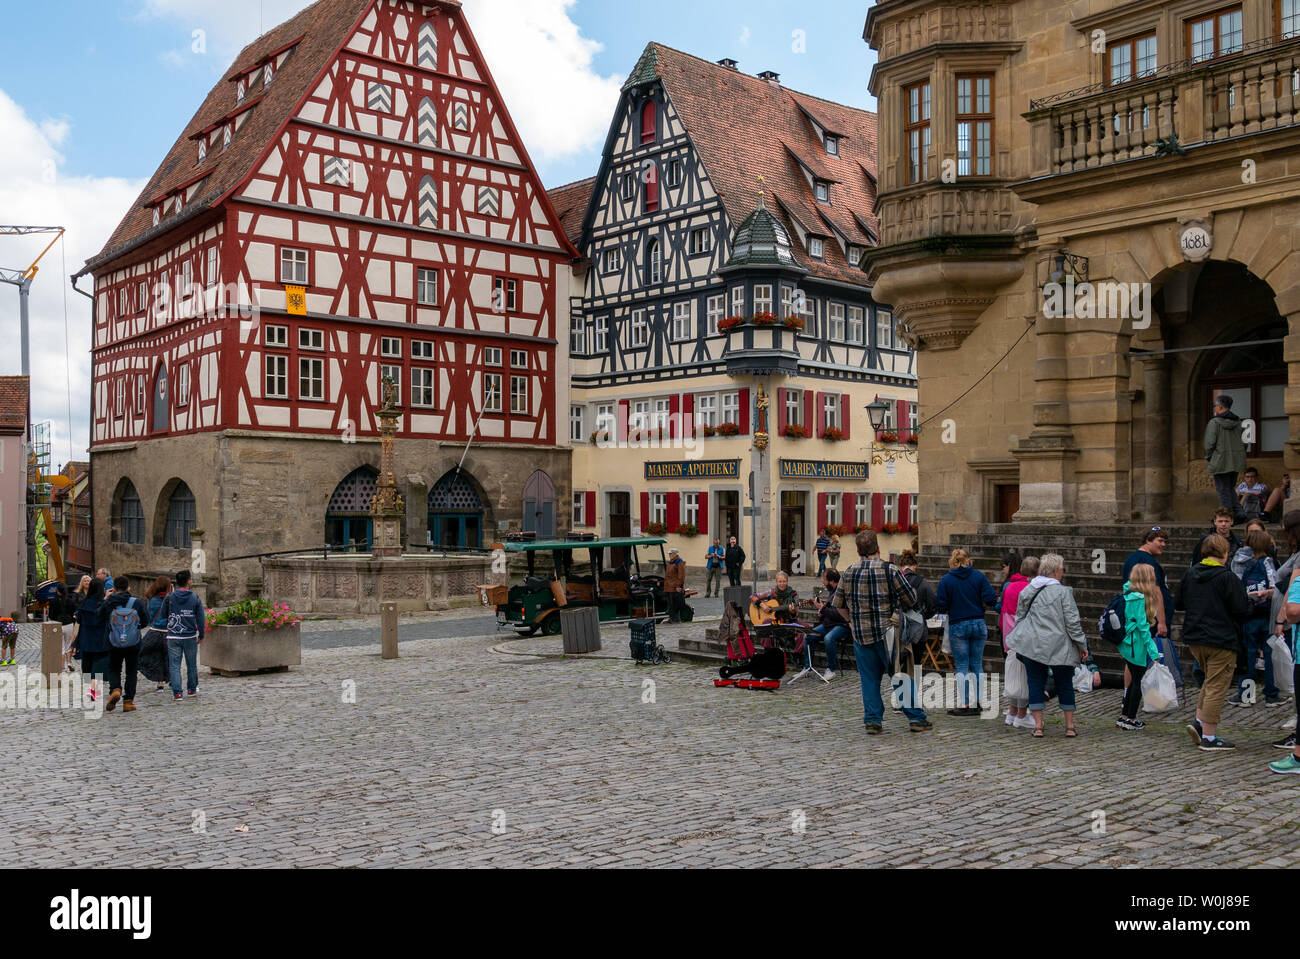 ROTHENBURG OB DER TAUBER, GERMANY - JUNE 12 , 2019: historical town hall at the market square Stock Photo